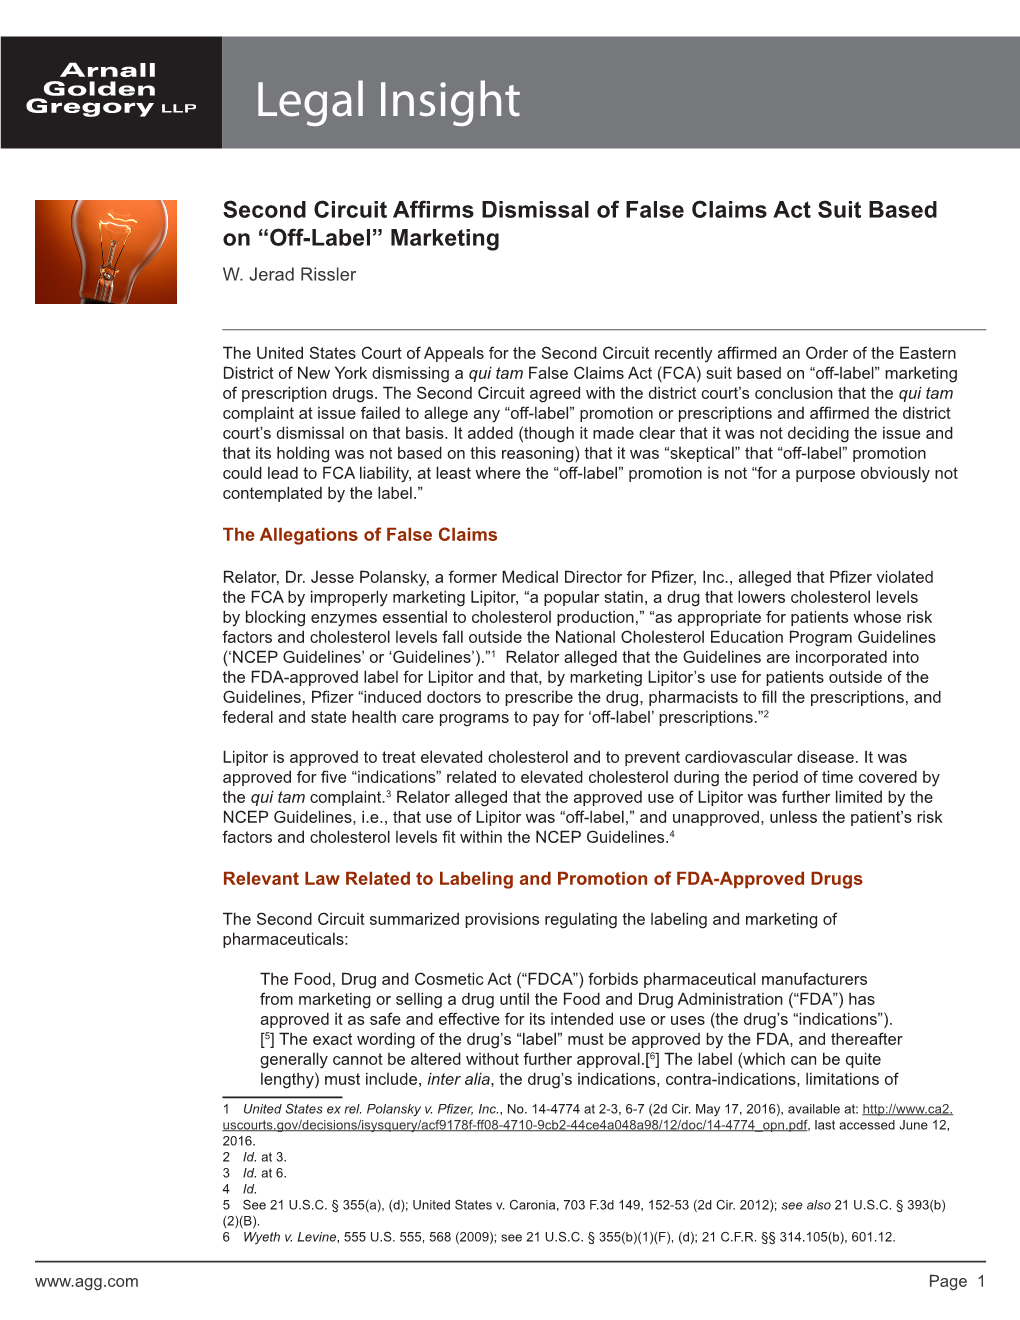 Second Circuit Affirms Dismissal of False Claims Act Suit Based on “Off-Label” Marketing W